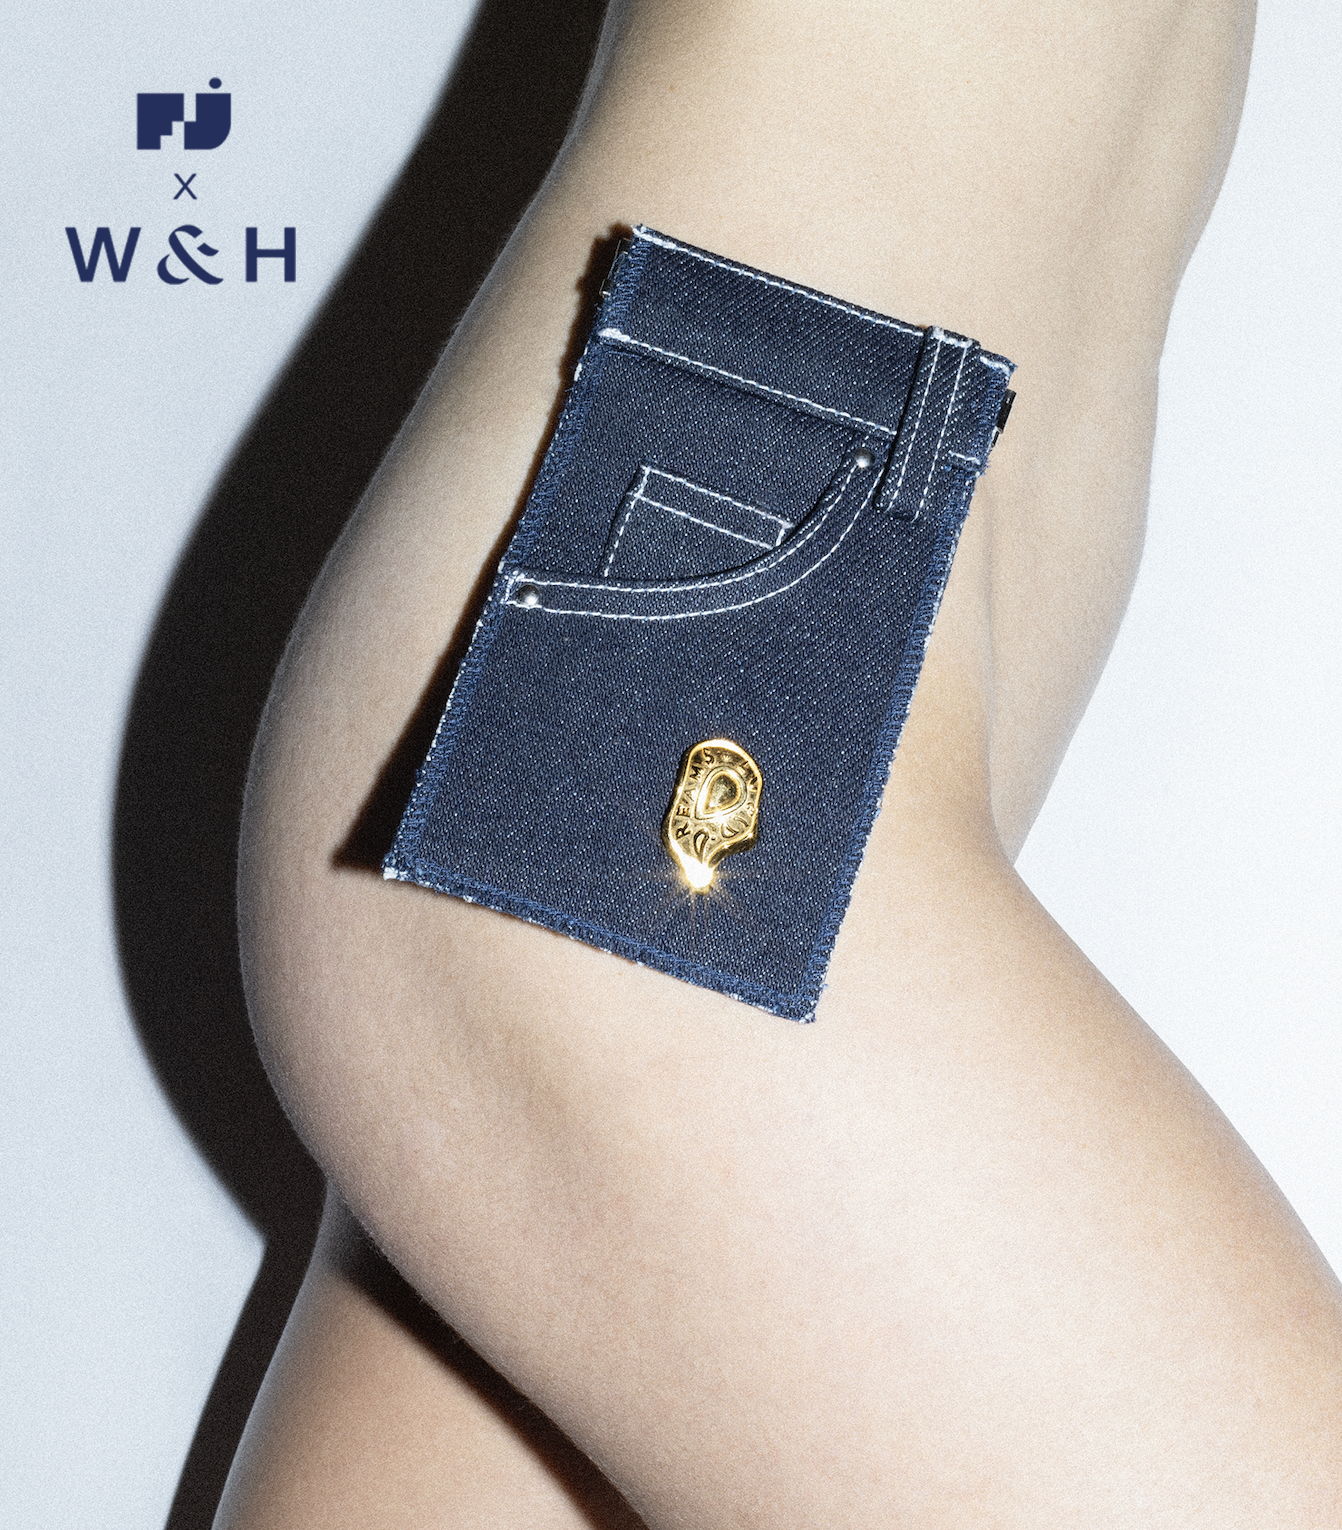 About THE JEANS POUCH ​
A reimagined denim pouch with a three pocket design and white stitching. Made from 100% Japanese denim and fitted with a top clasp closure. Logo printed on the back.